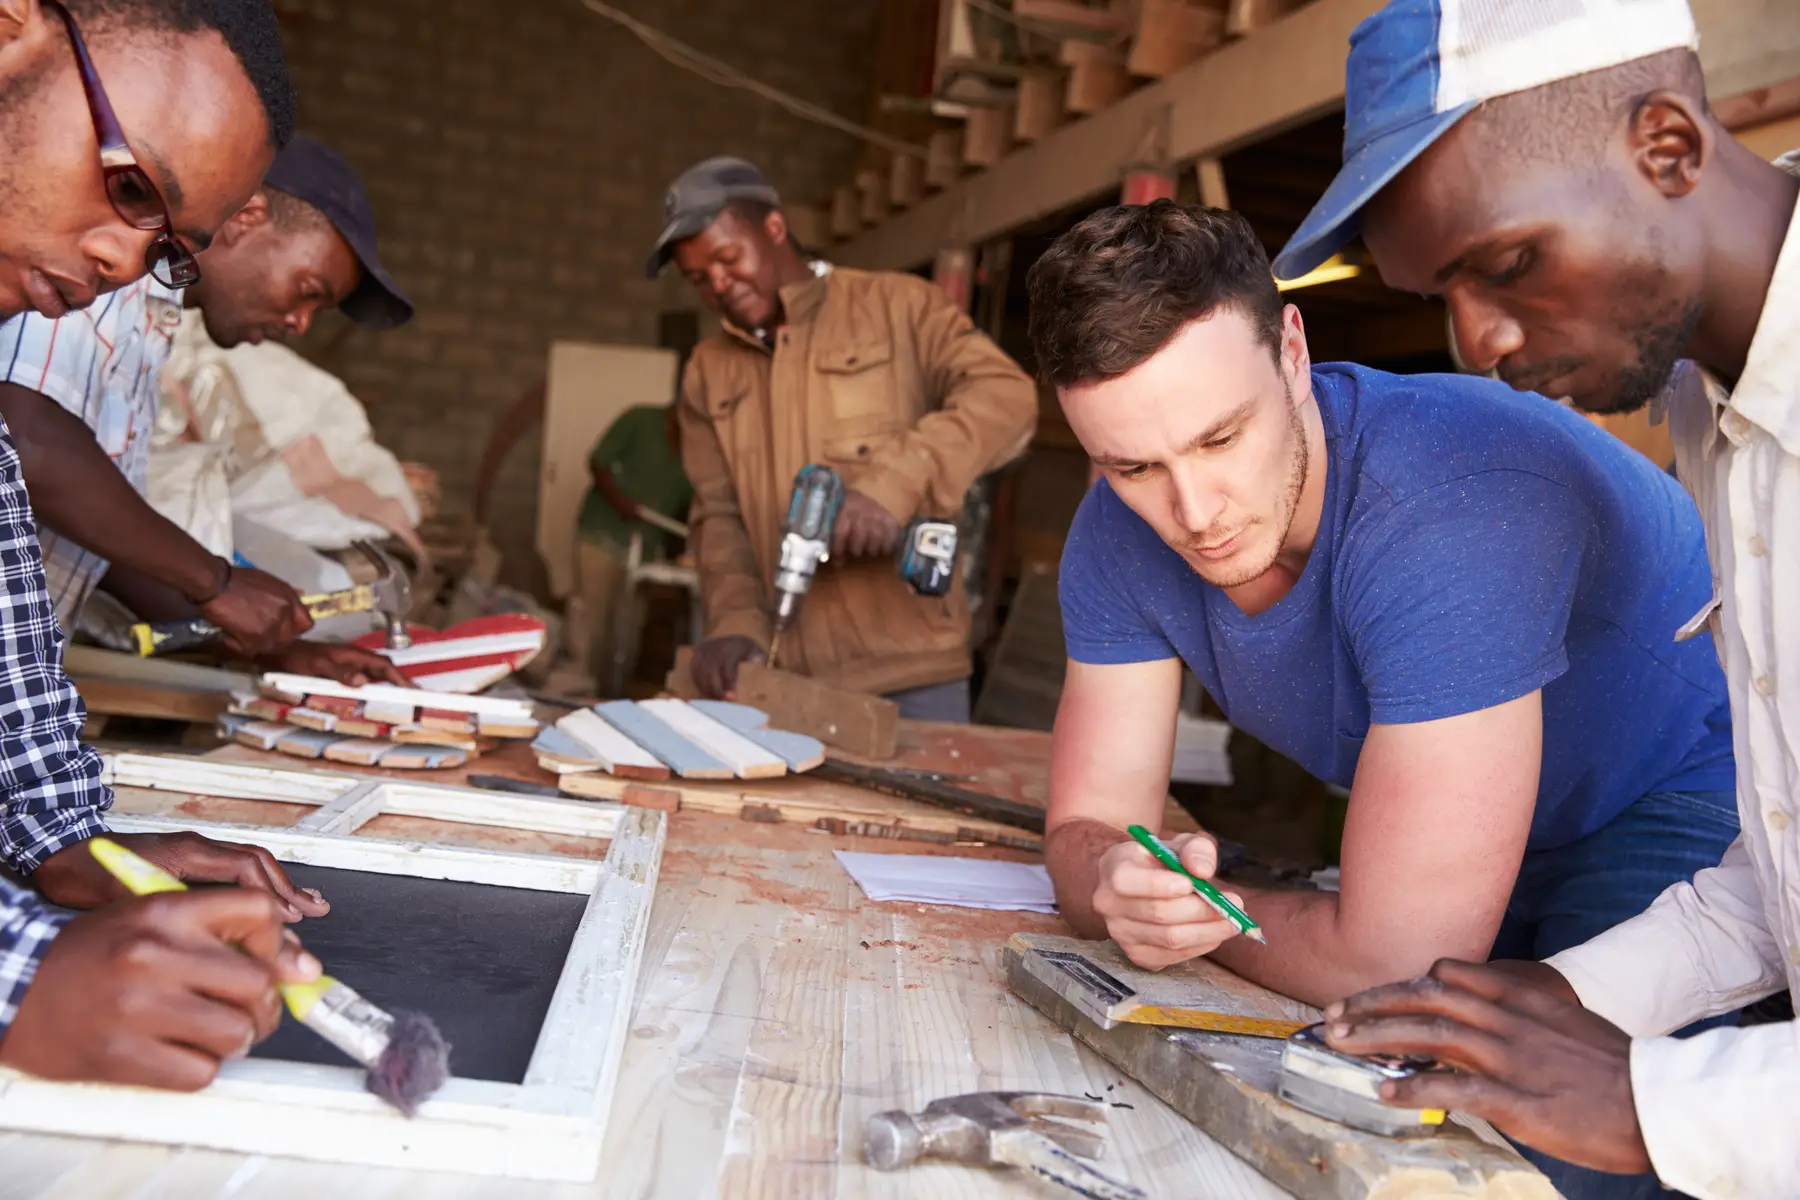 Carpentry workshop in South Africa